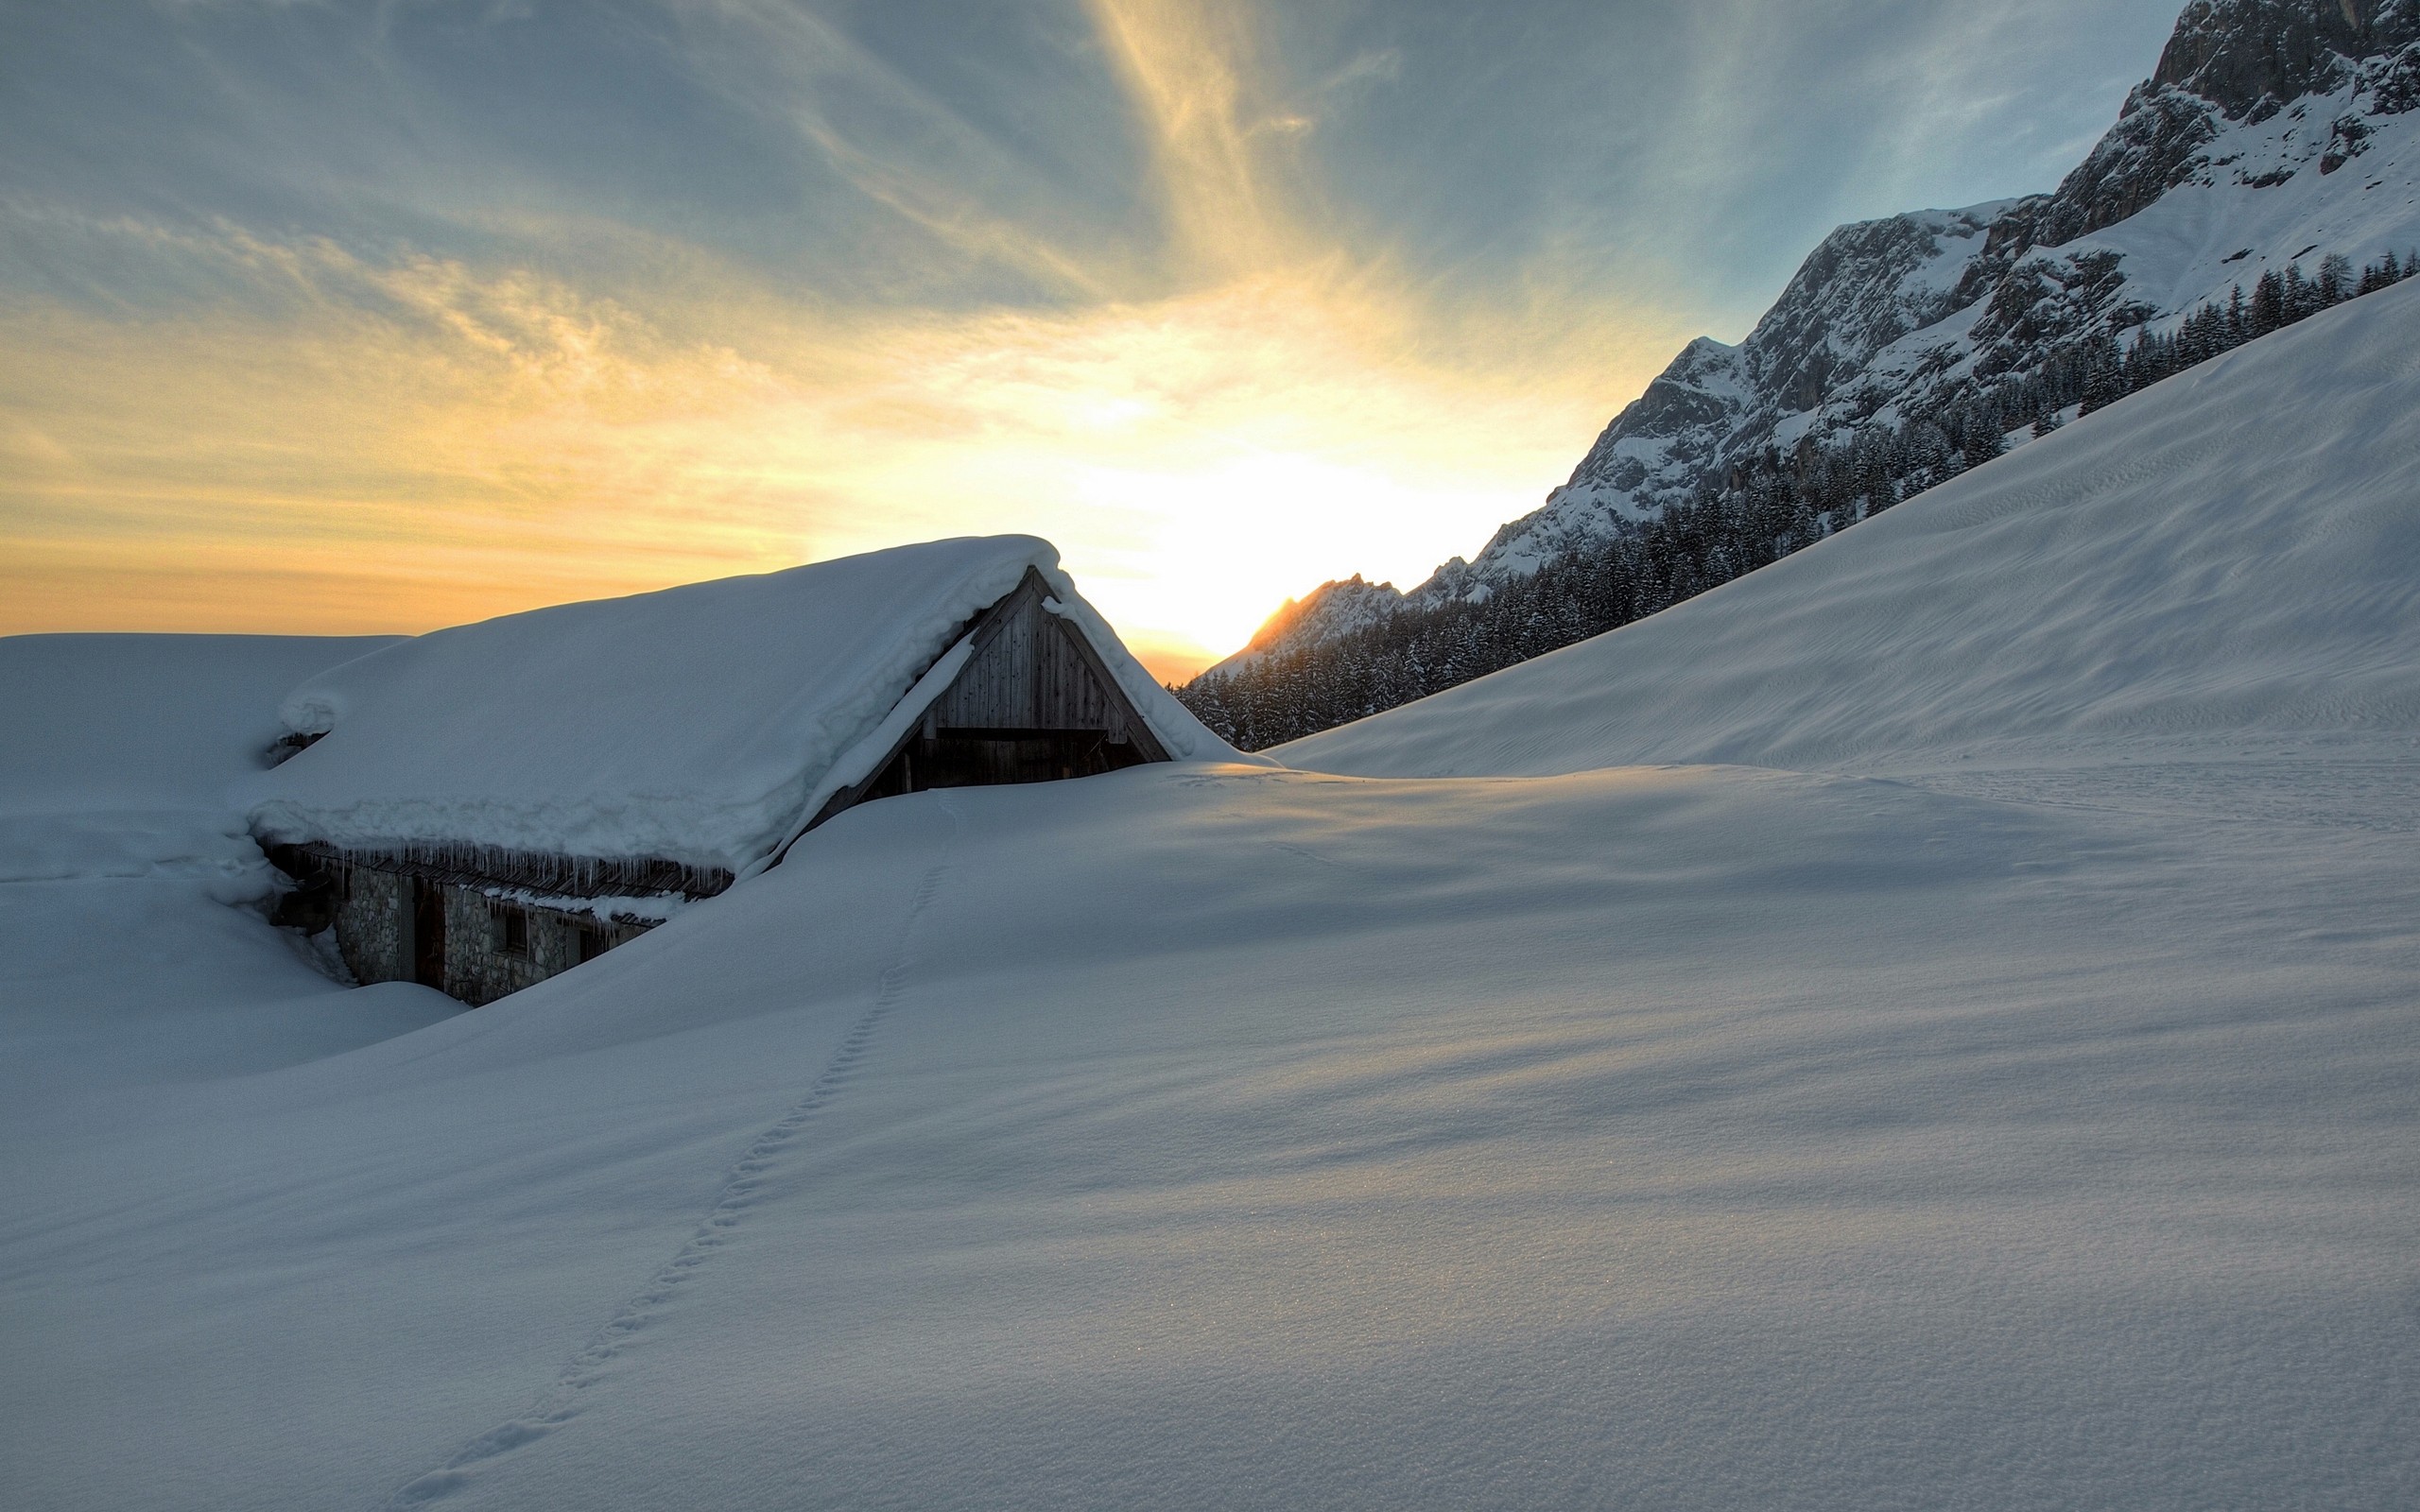 General 2560x1600 nature sunset mountains snow cabin barns cold winter ice sunlight